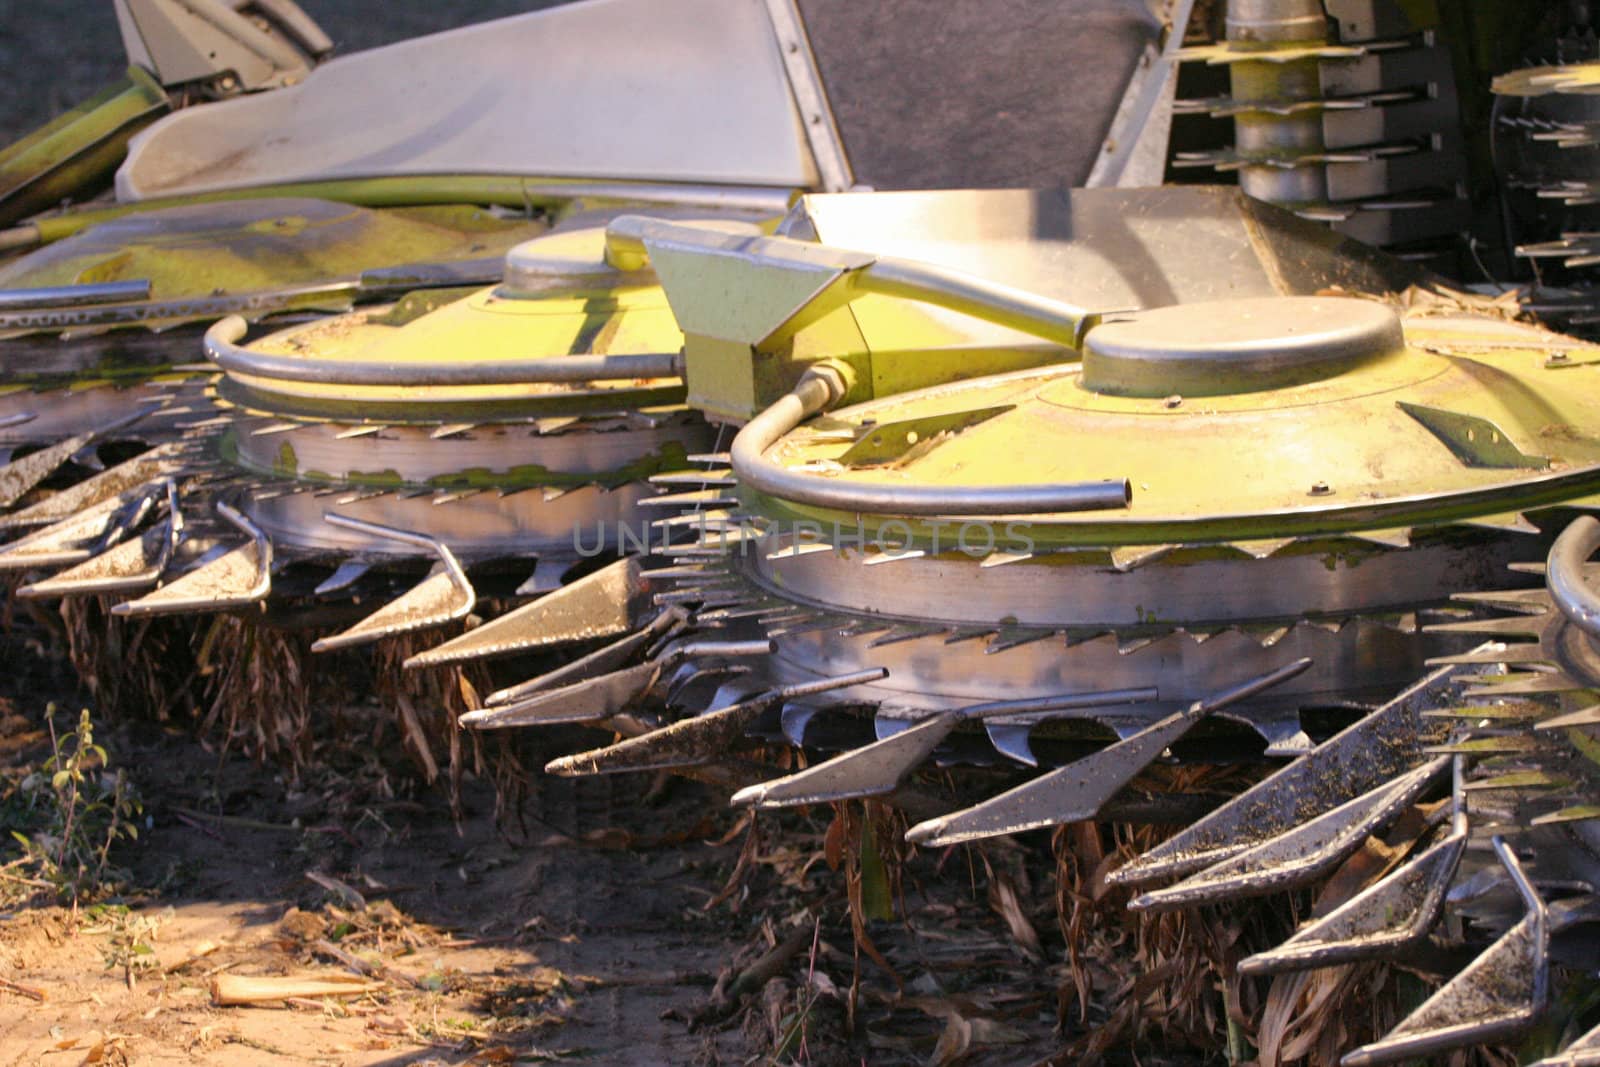 Metal blades of a corn chopper during harvest